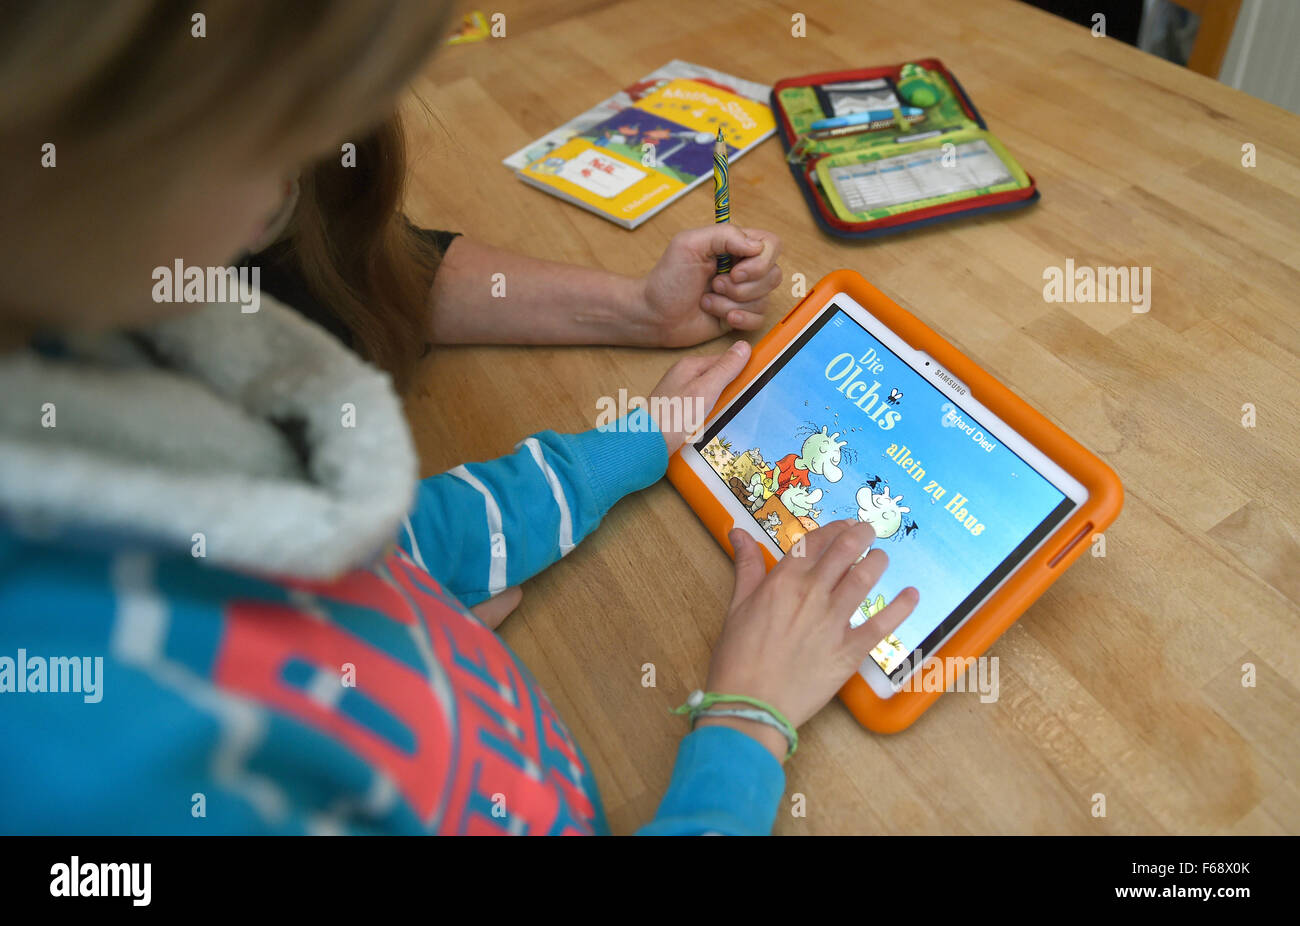 Oldenburg, Germany. 10th Nov, 2015. Ten-year-old Peeke plays the educational game 'Die Olchis' (The Olchis) on a tablet with his mother at their home in Oldenburg, Germany, 10 November 2015. Publishing companies are increasingly offering apps and educational games in addition to traditional storybooks. Photo: CARMEN JASPERSEN/dpa/Alamy Live News Stock Photo